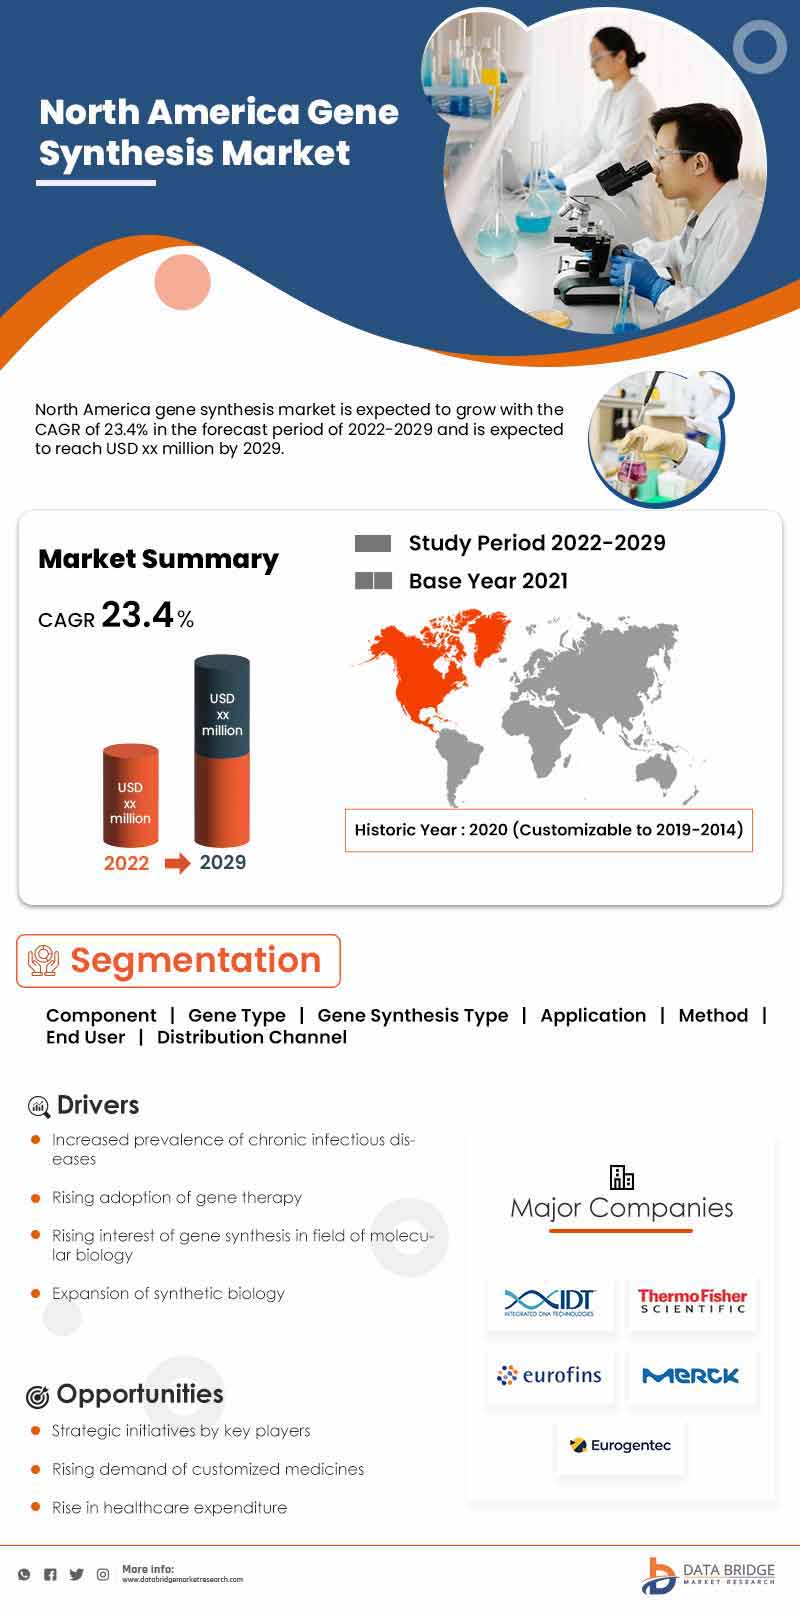 North America Gene Synthesis Market